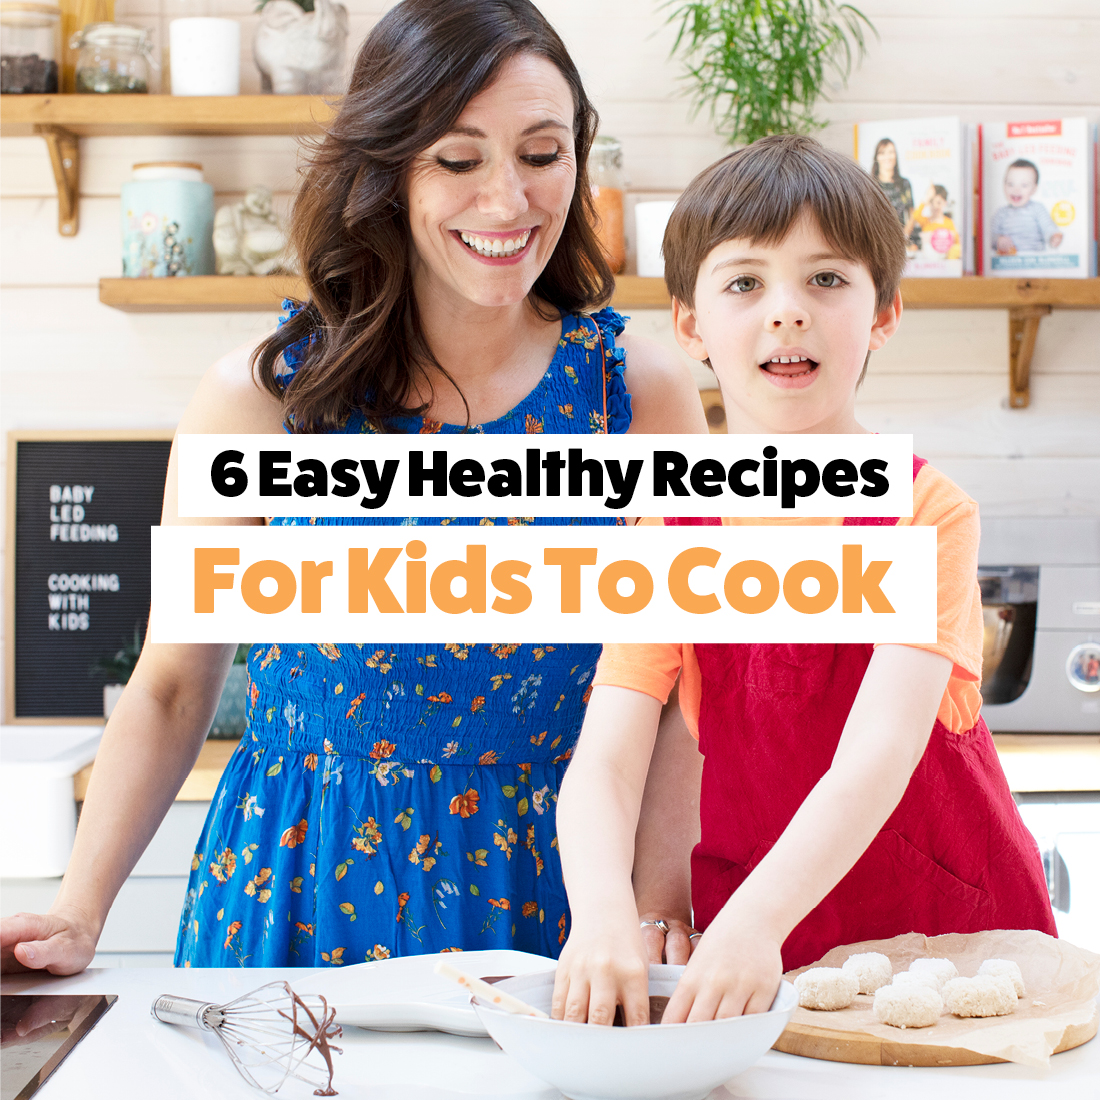 6 Healthy Recipes for kids to cook that are easy and delicious too ...